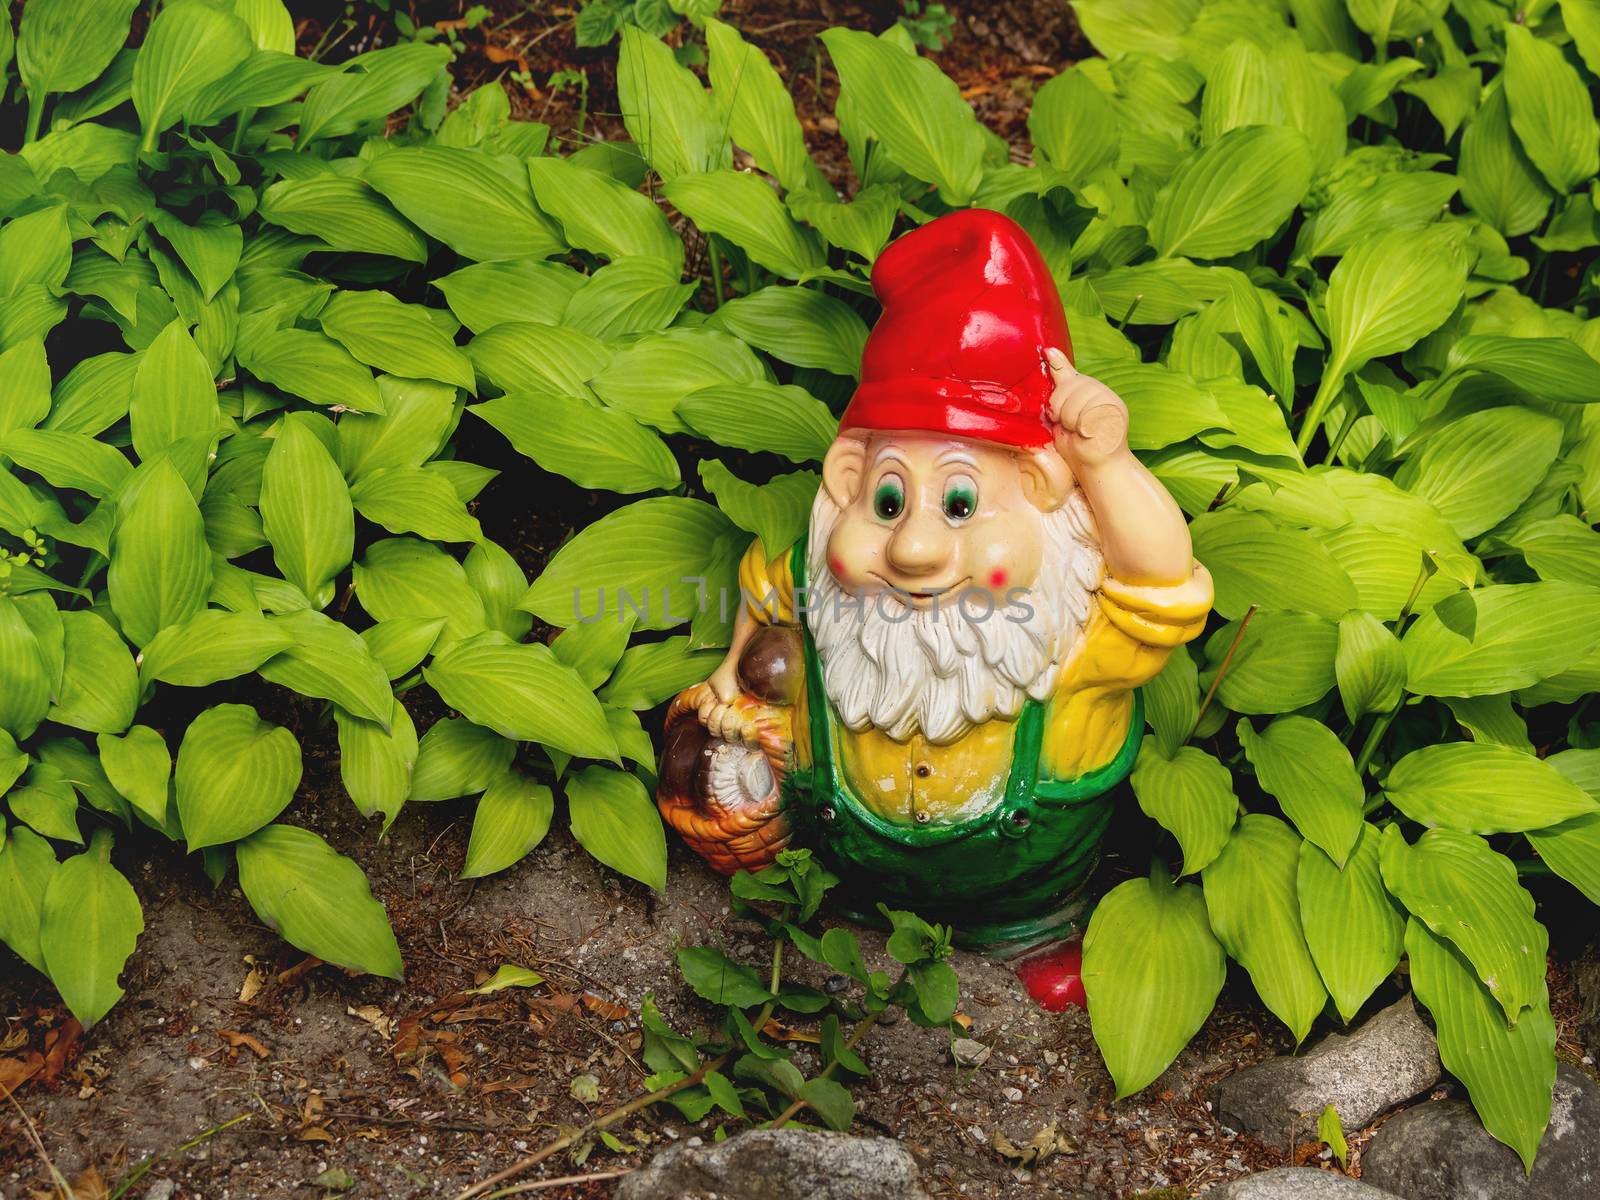 Garden gnome with basket full of mushrooms. Colorful sculpture in leaves of Hosta plant. Summer sunset in garden. by aksenovko